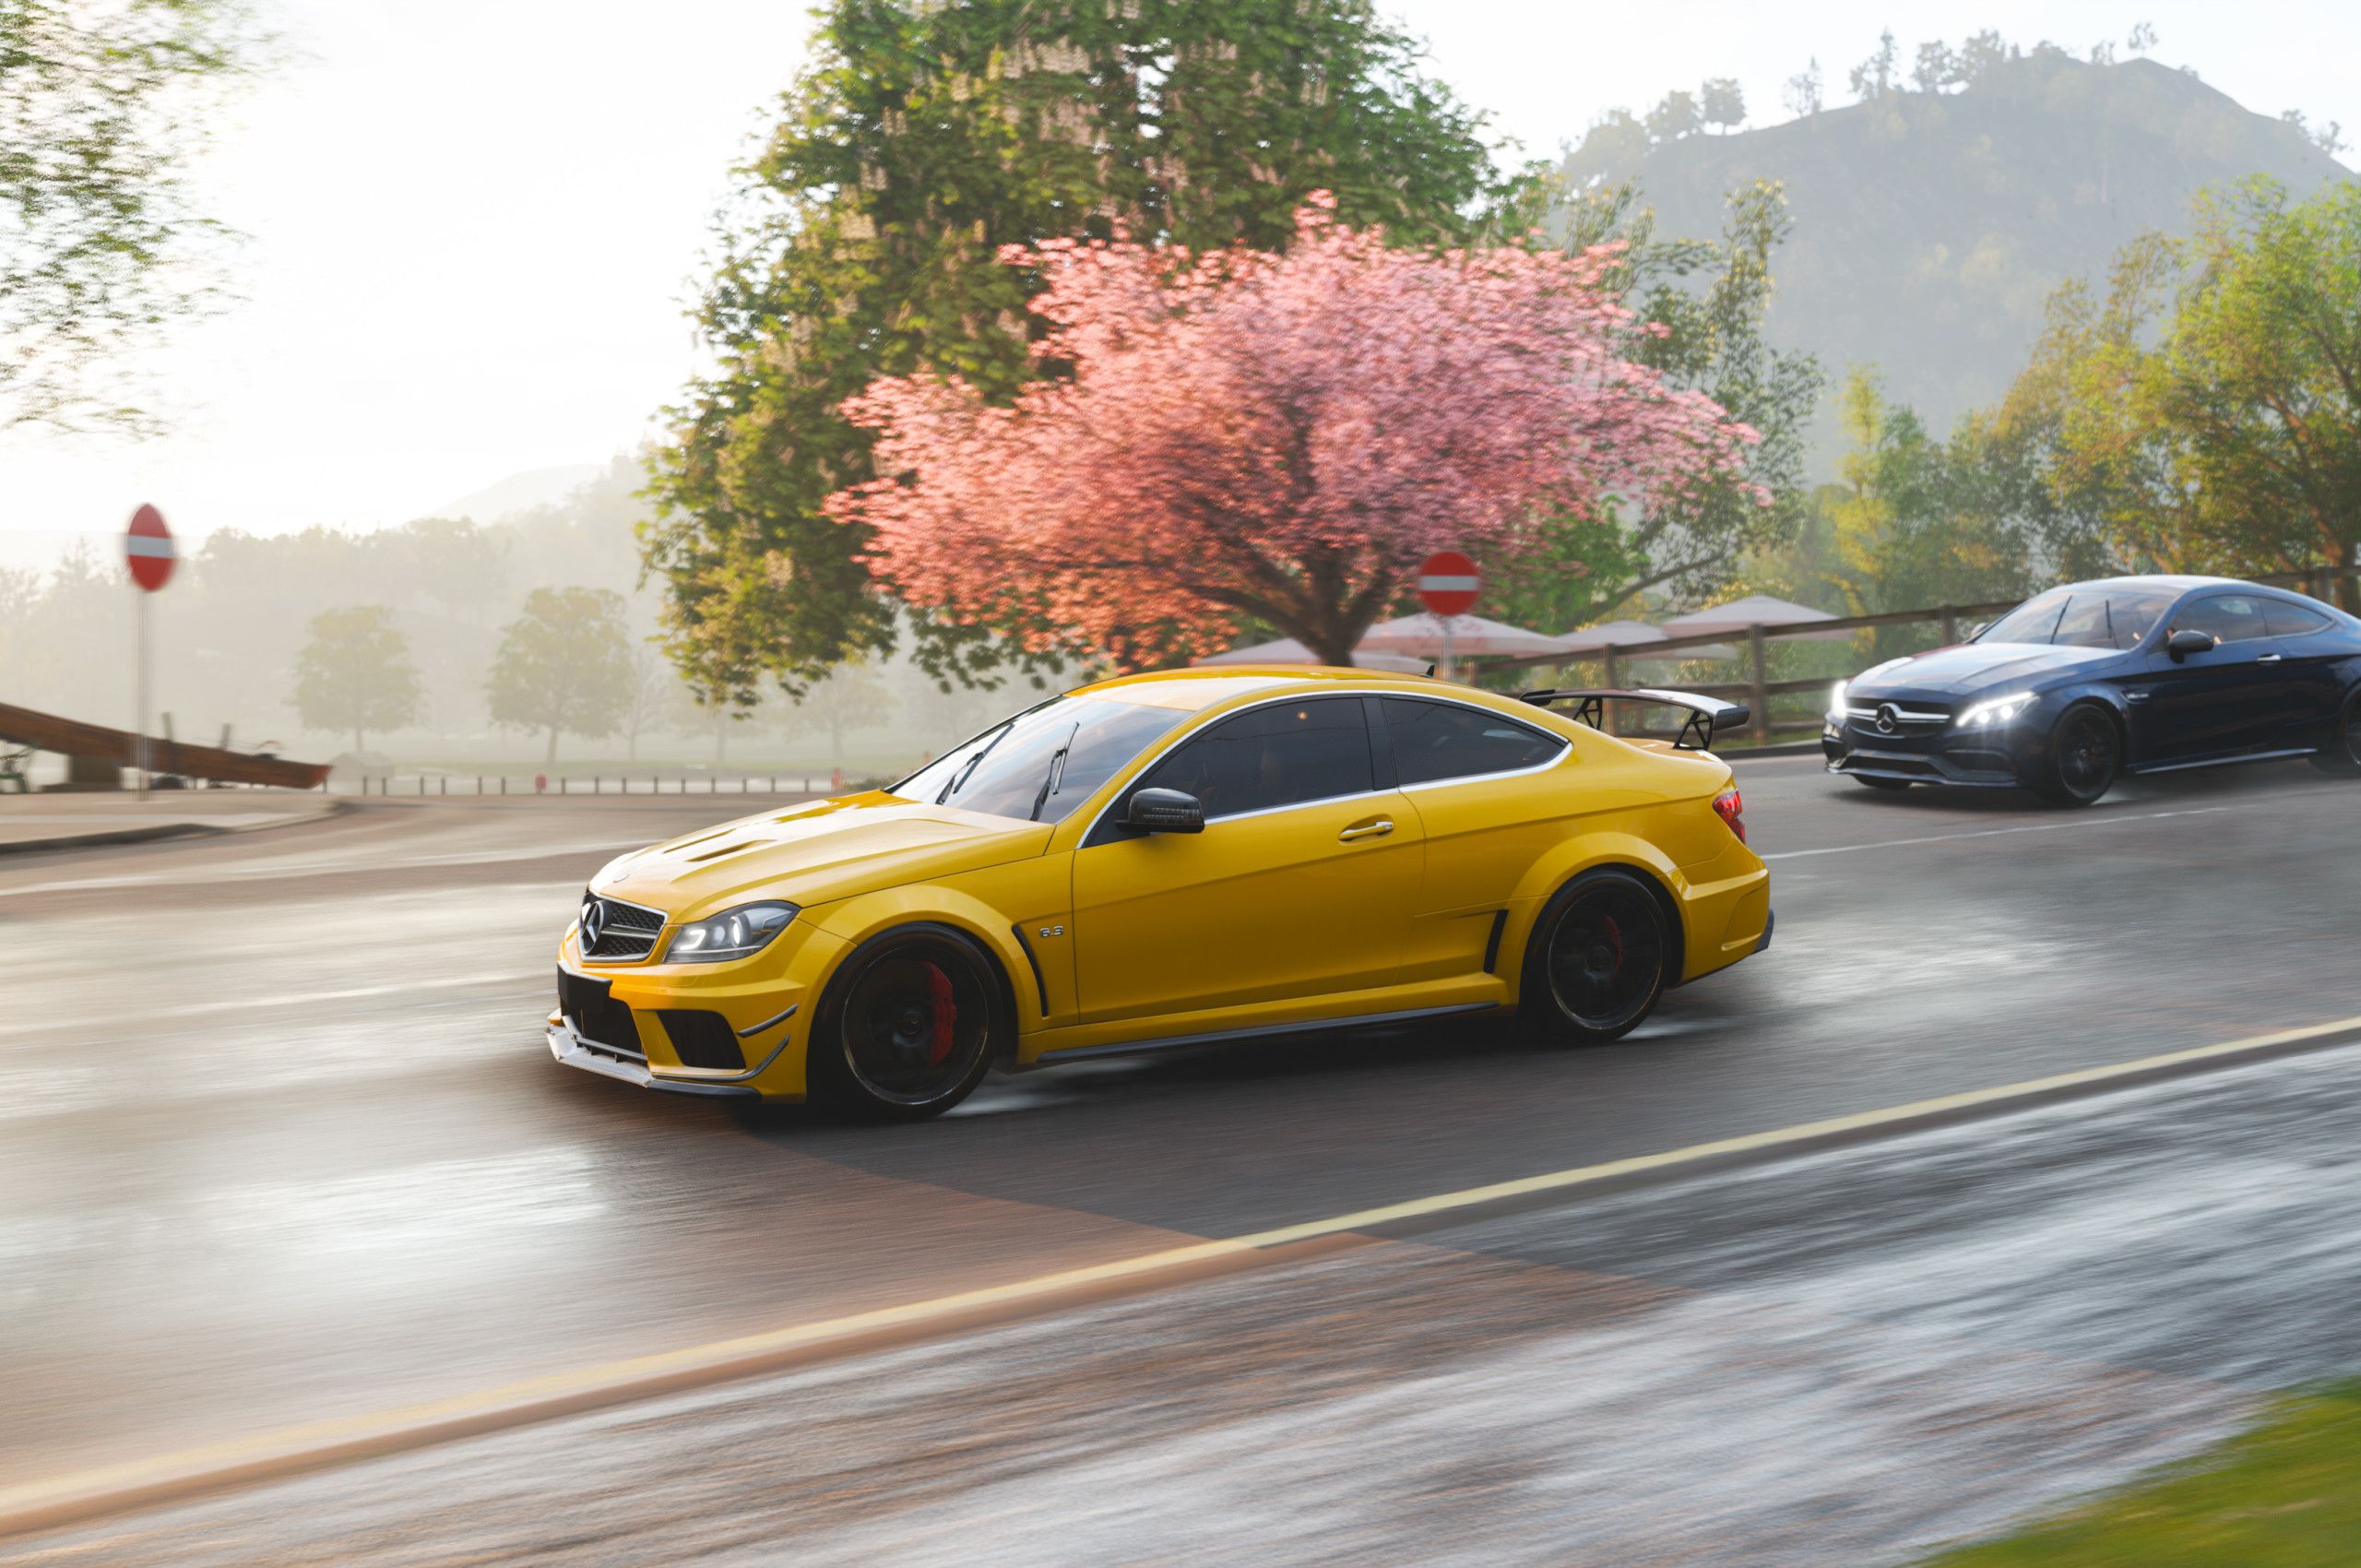 Mercedes Benz C63 AMG Coupe In Forza Horizon 4 4k